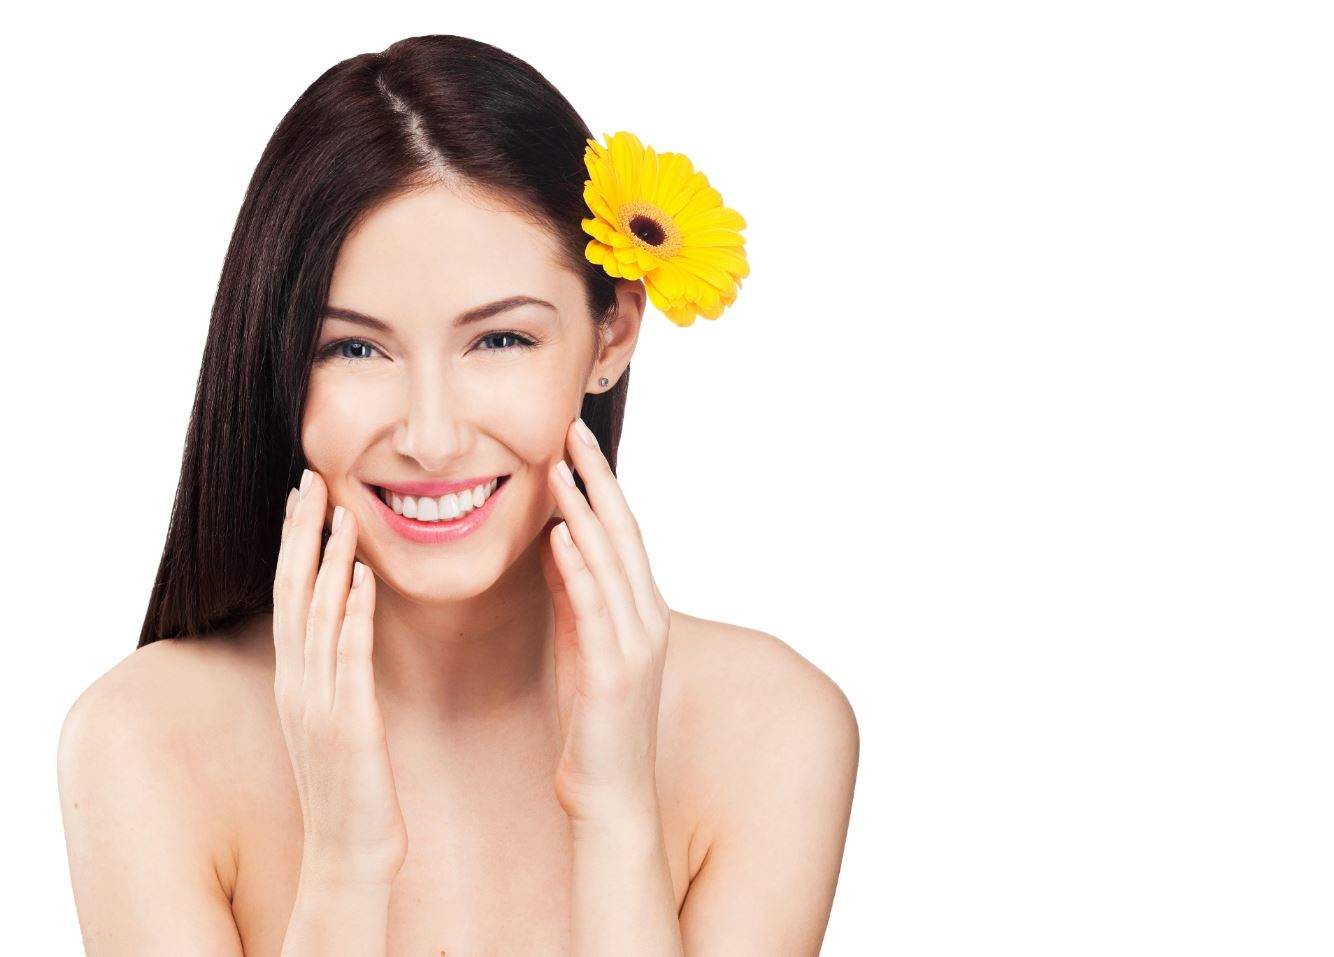 Smooth and Spry - 5 Ways to Make Your Skin Feel Like New